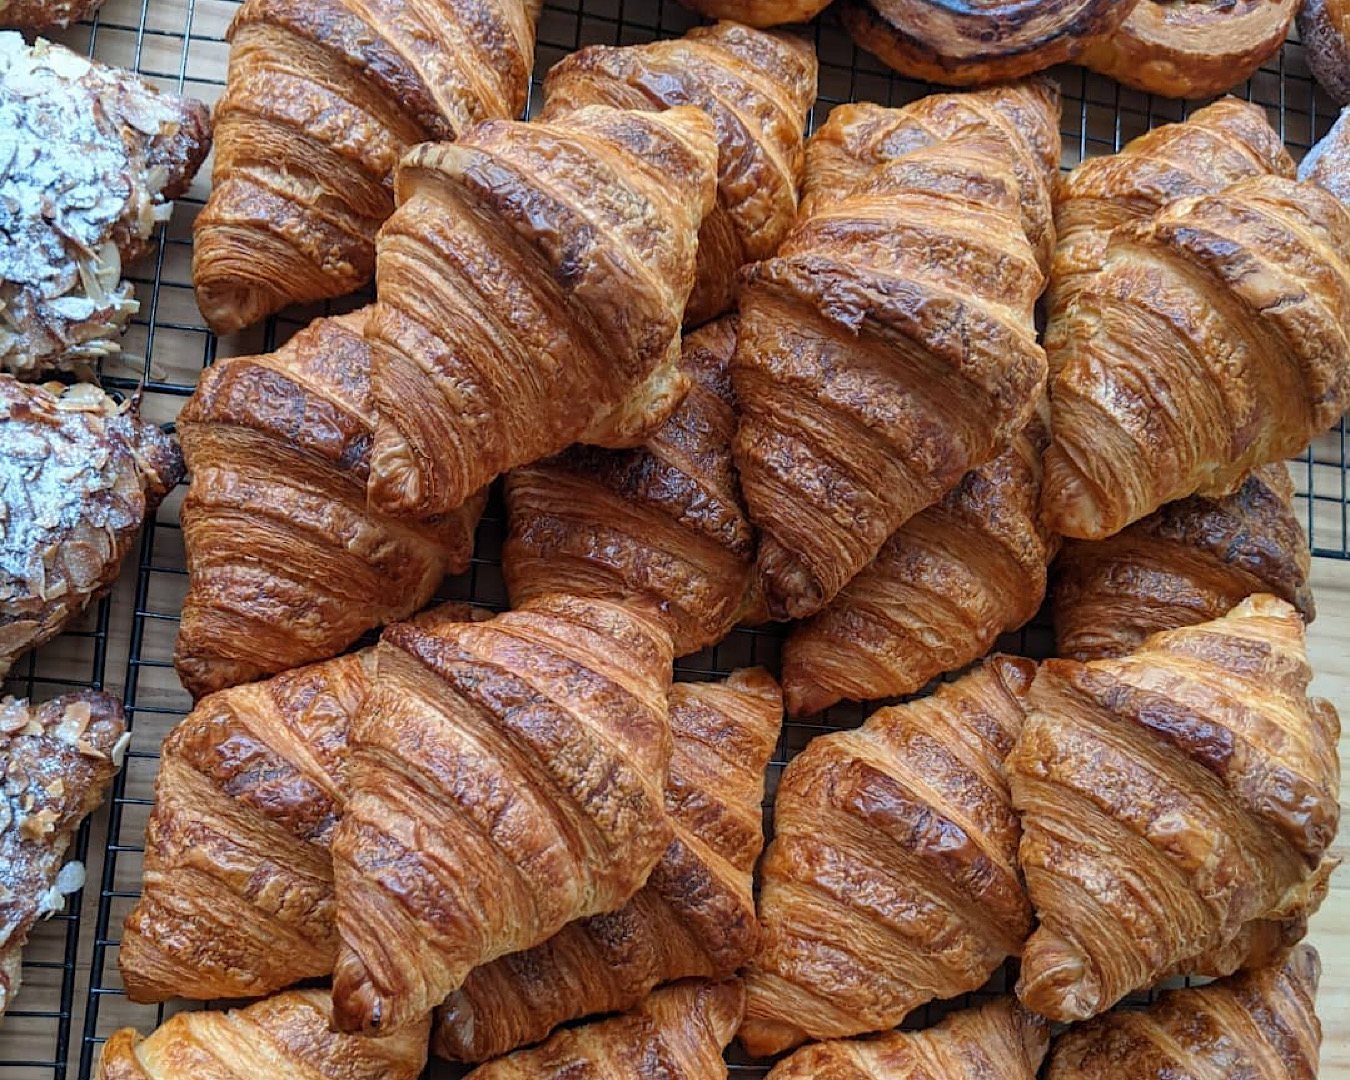 A pile of croissants from Billow (with a glimpse of almond croissants off to the left), one of the best bakery-cafes in New Plymouth. 